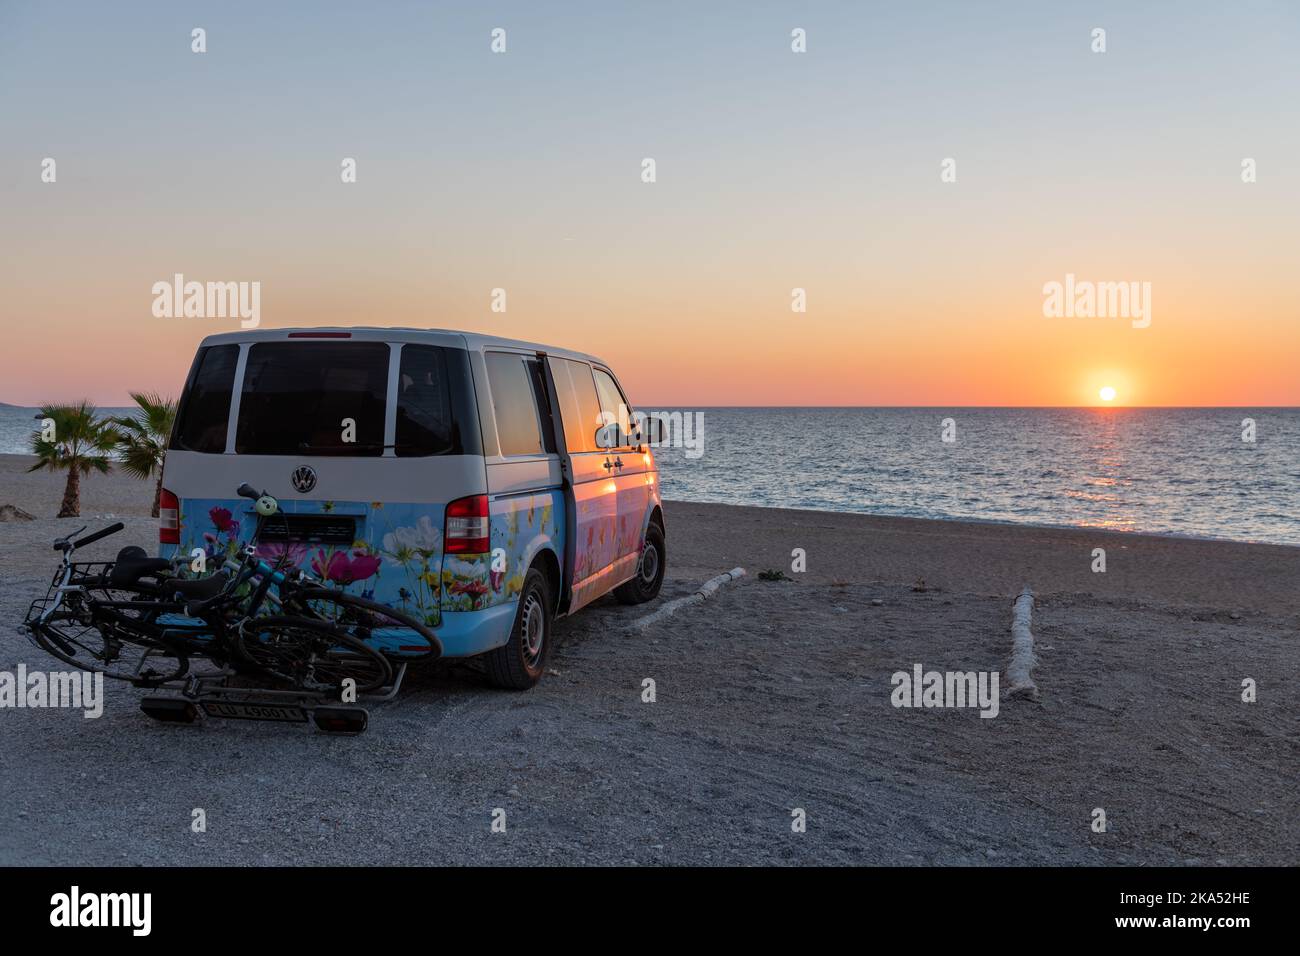 Lefkada island. Greece-10.17.2022. A camper van parked on a beach with a stunning sunset view. Stock Photo